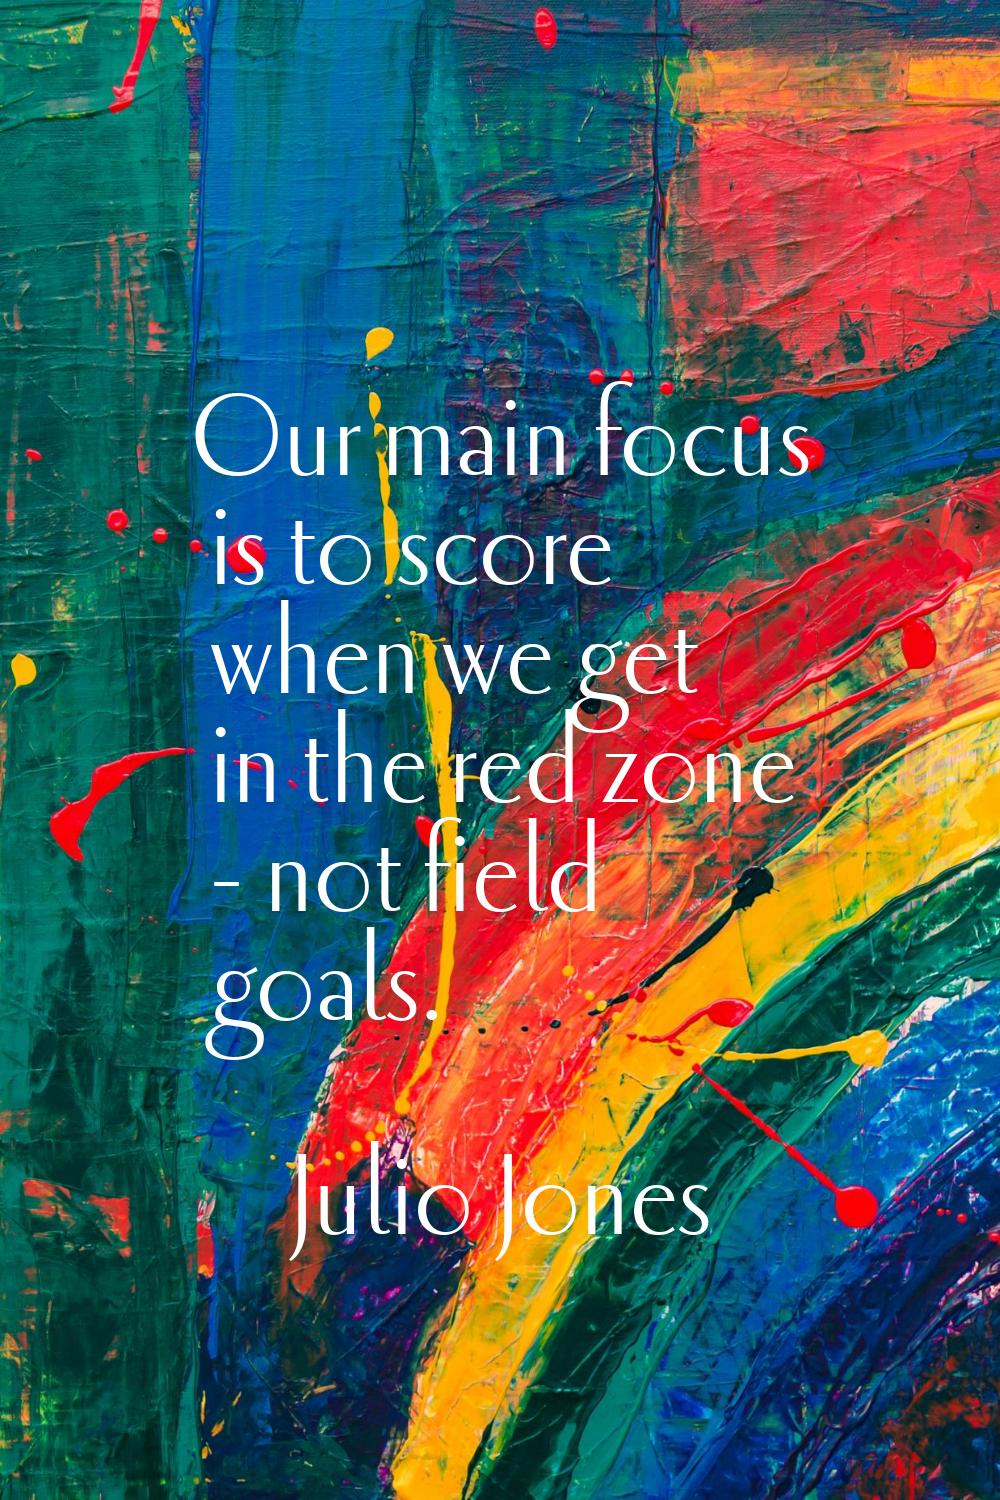 Our main focus is to score when we get in the red zone - not field goals.